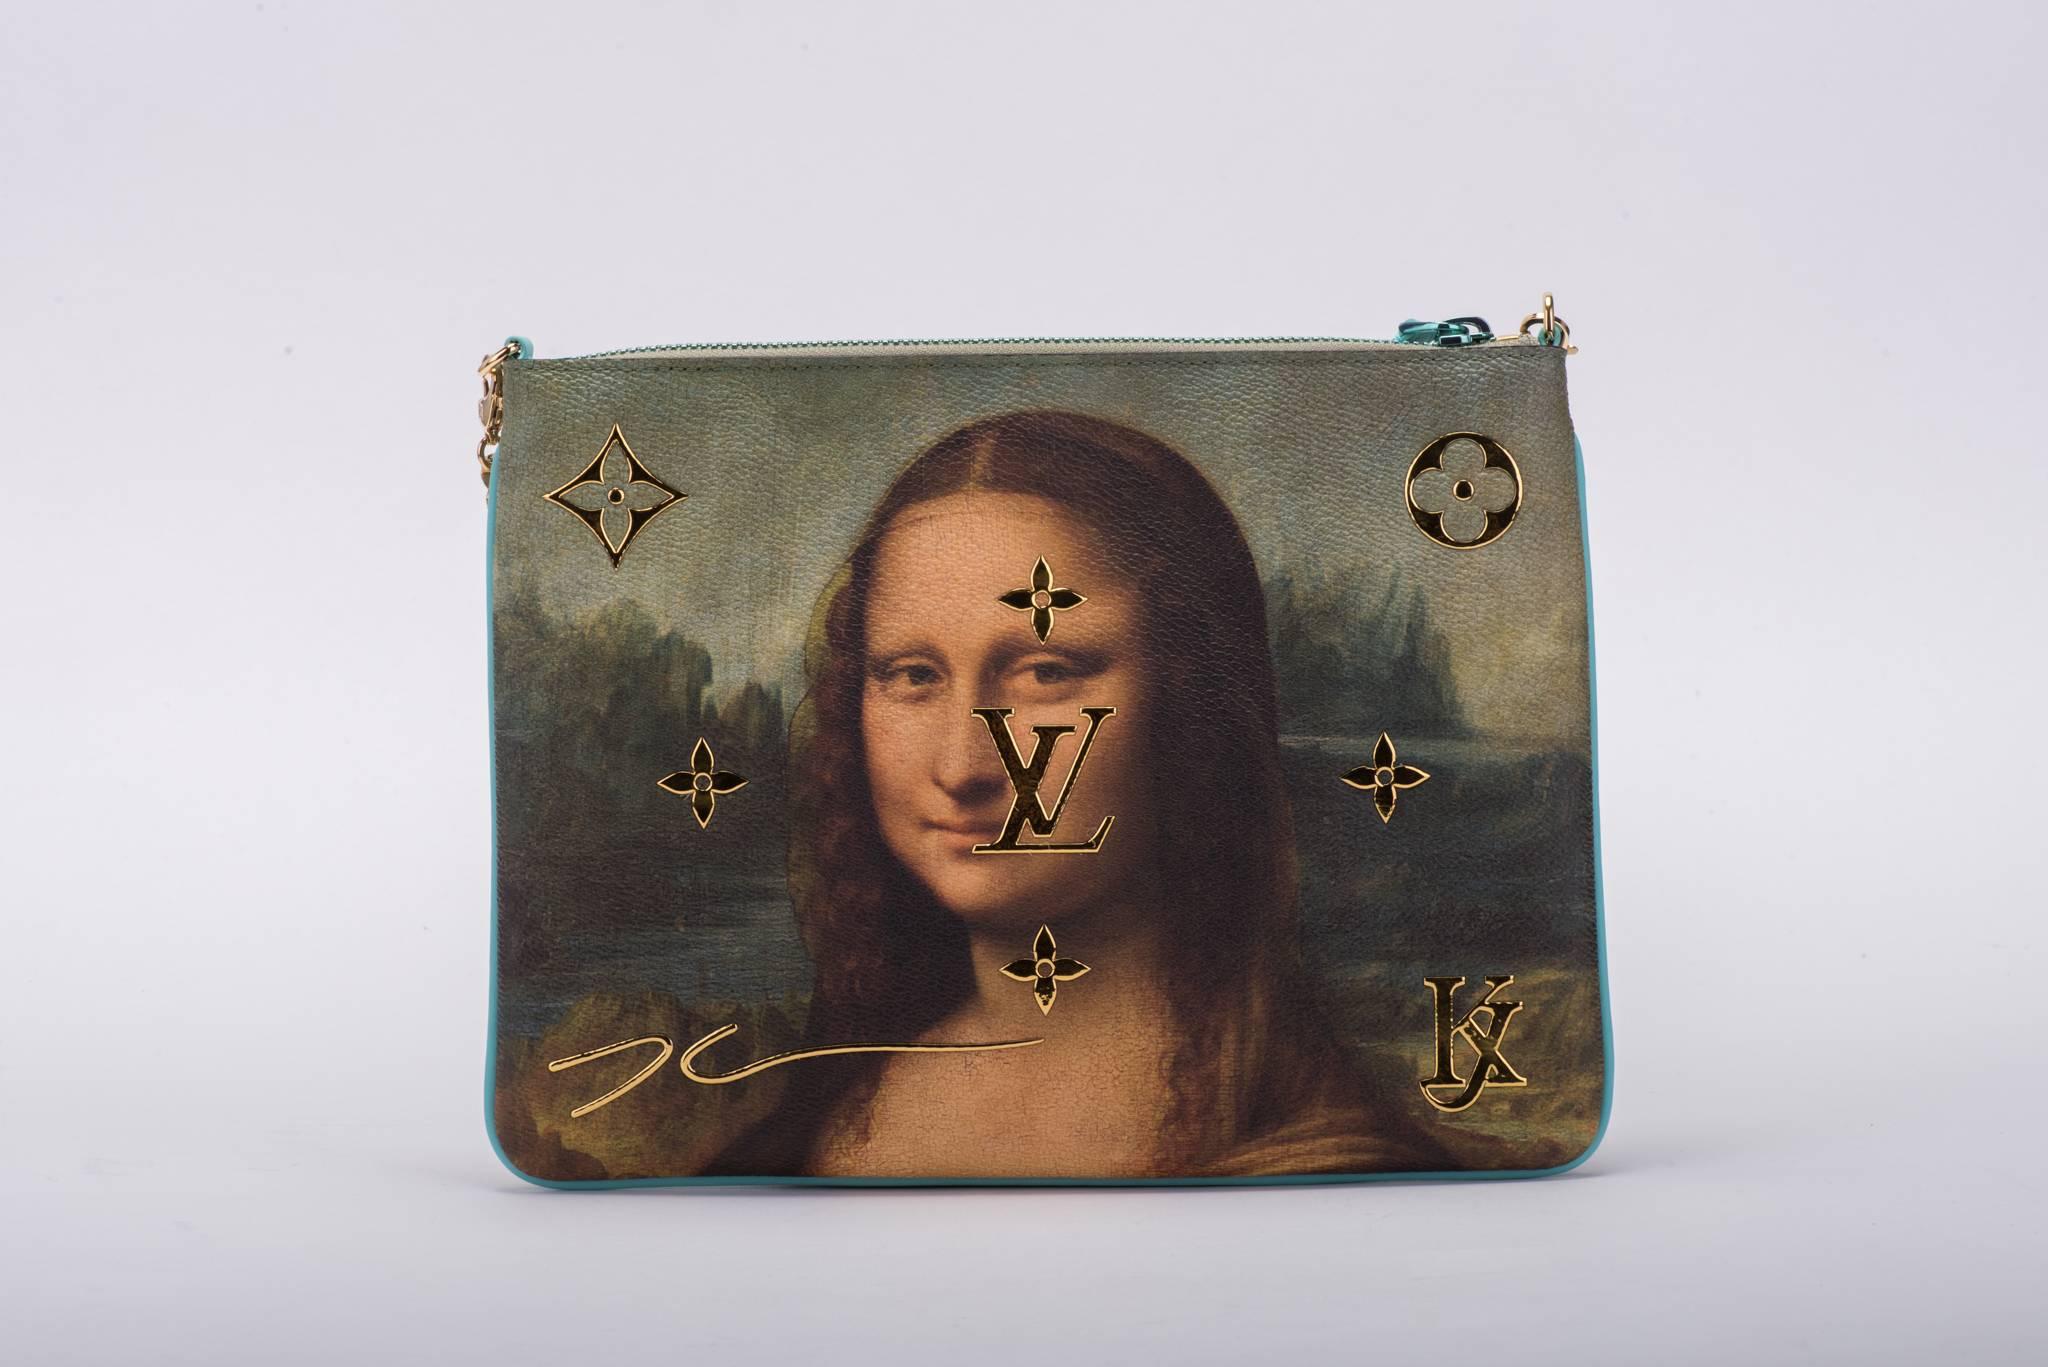 This bag is part of the much sought after Jeff Koons 